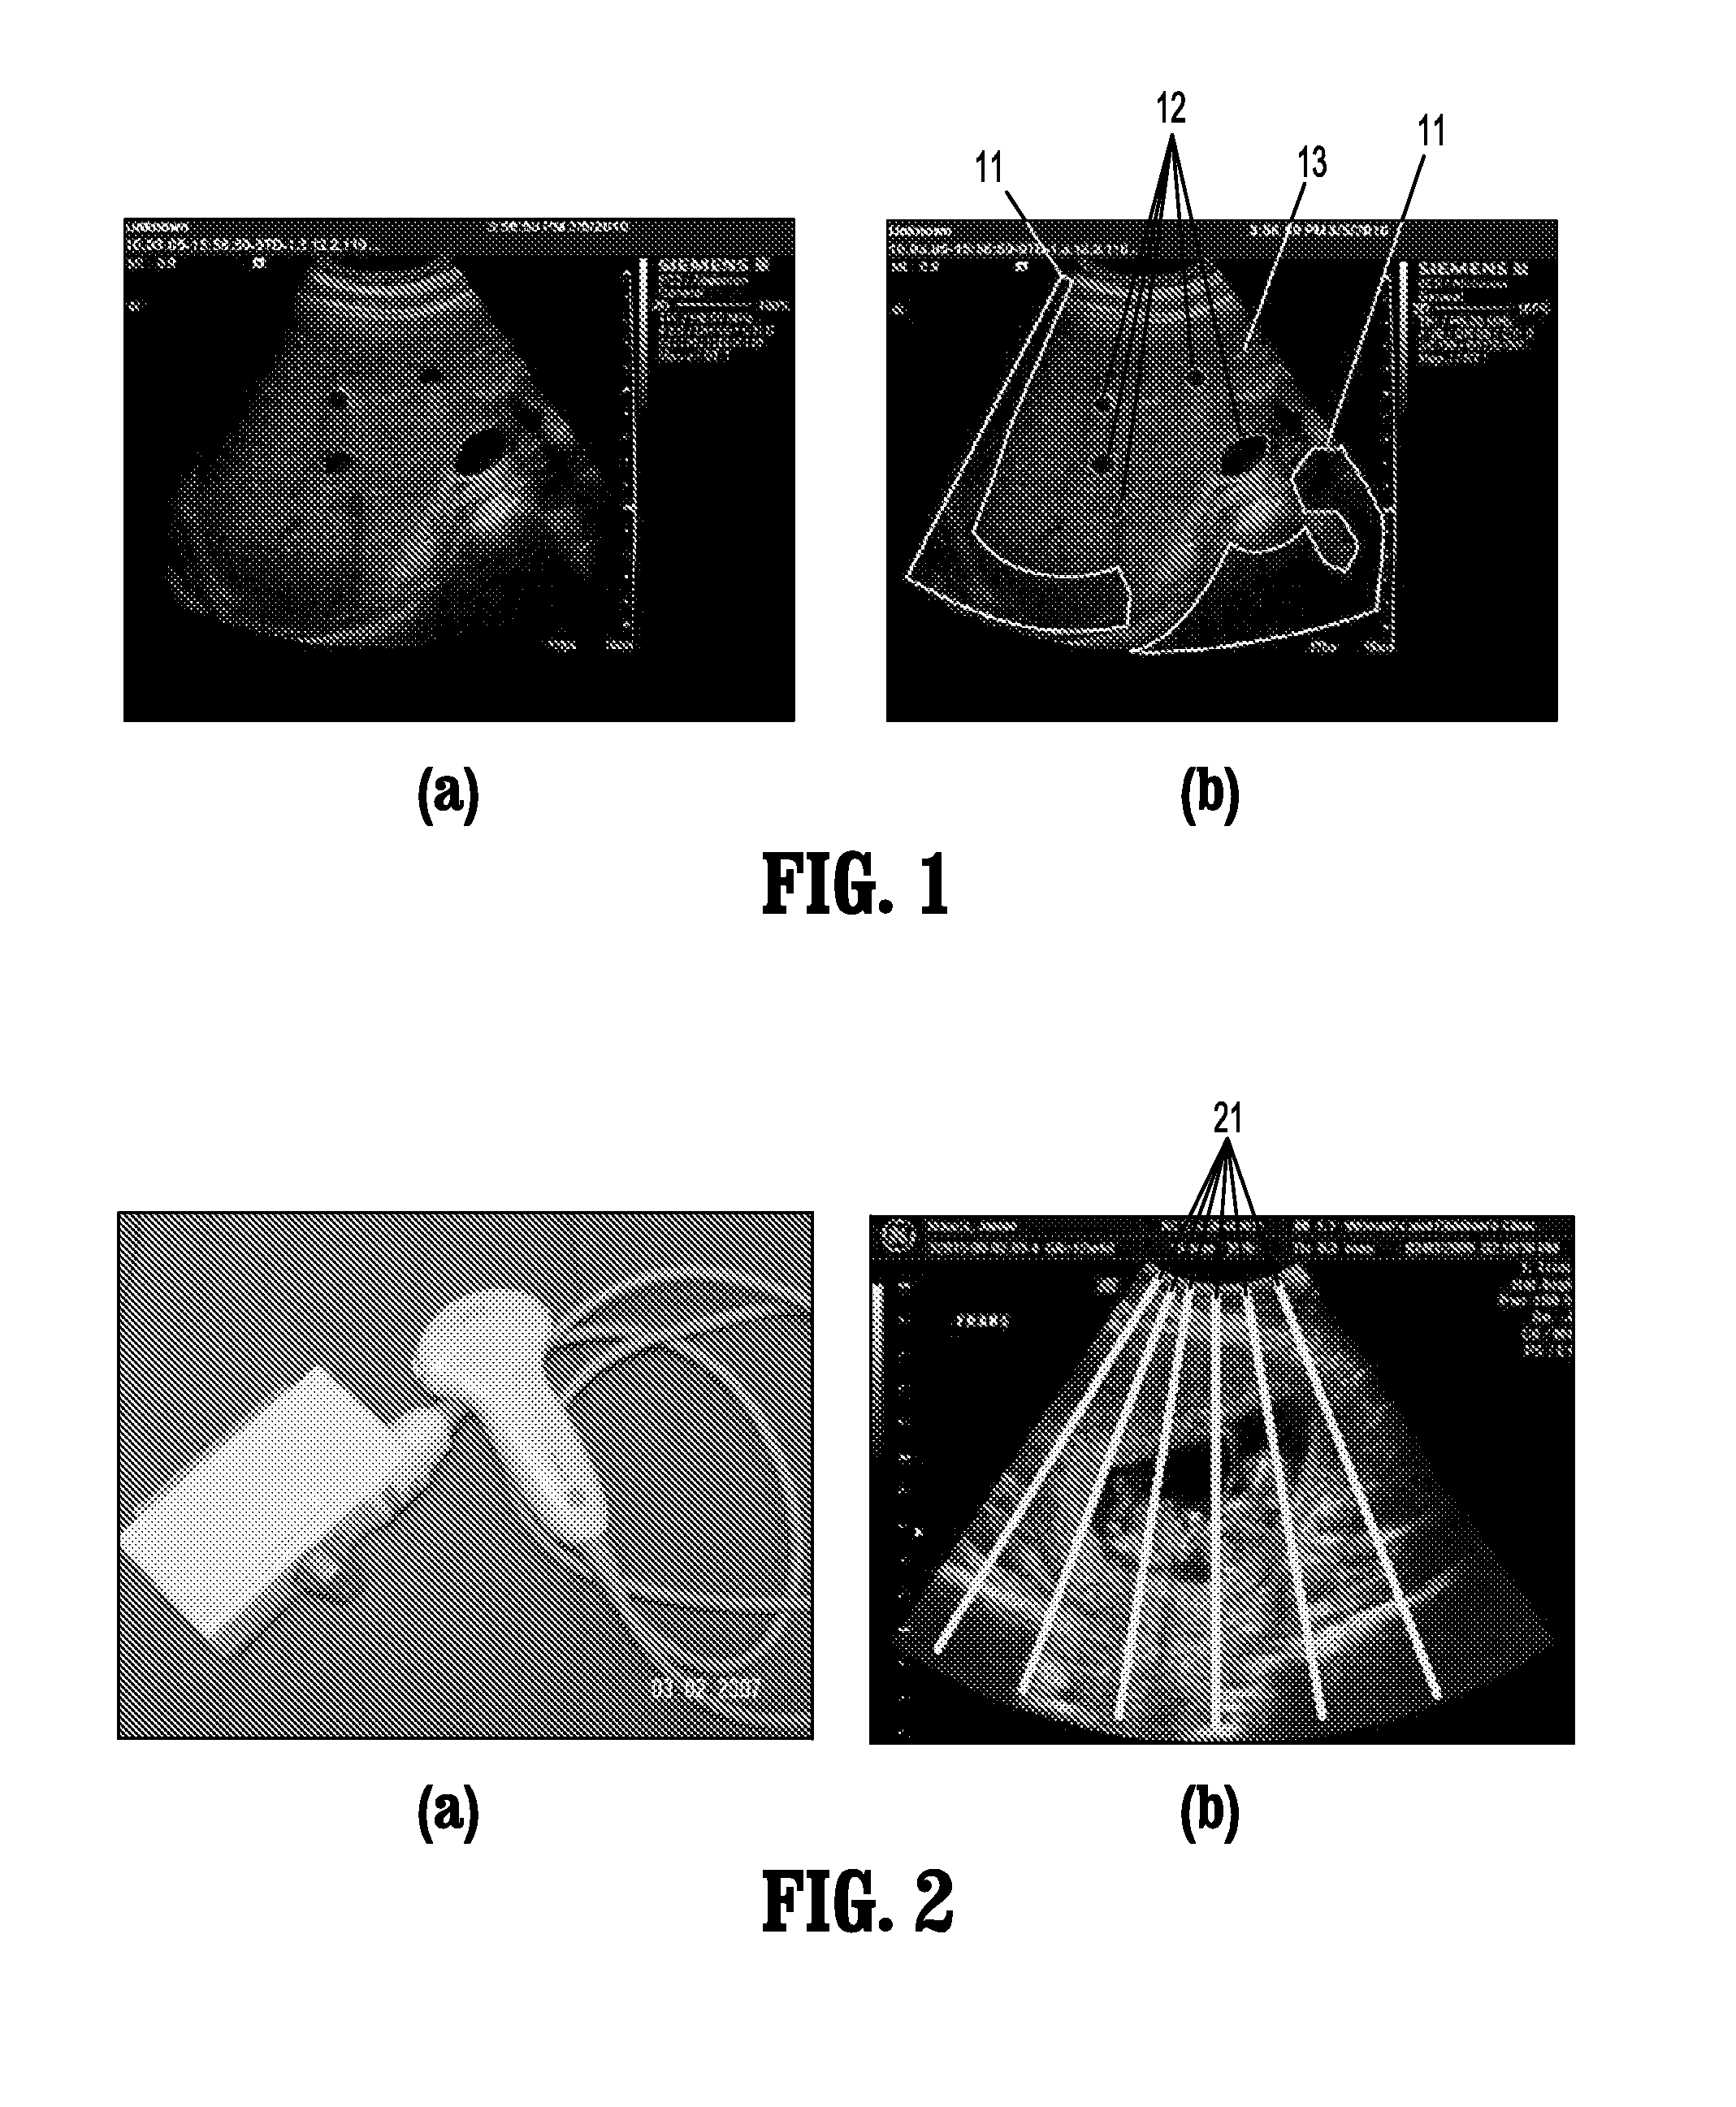 System and method for detection of acoustic shadows and automatic assessment of image usability in 3D ultrasound images